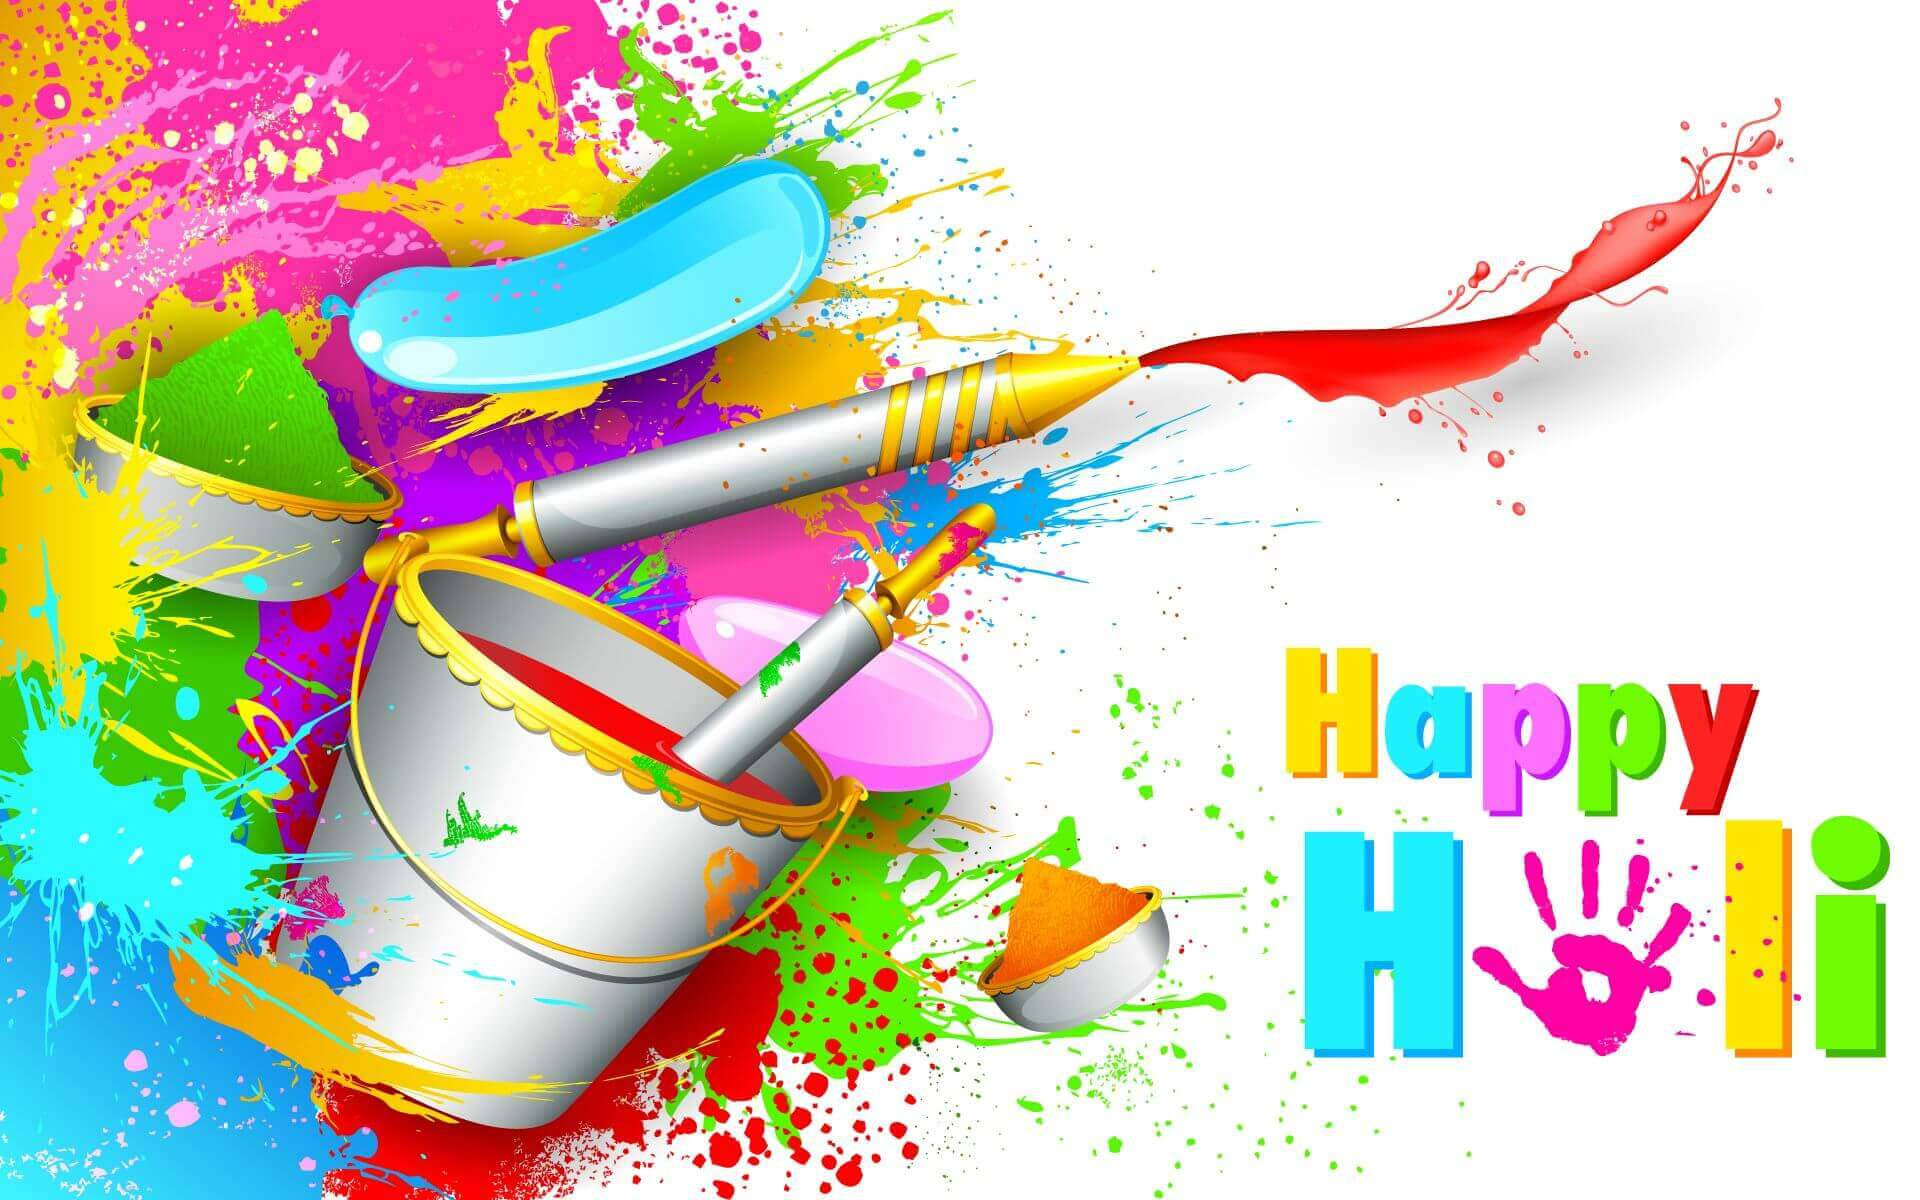 Download Colorful Paint Happy Holi Hd Wallpaper 